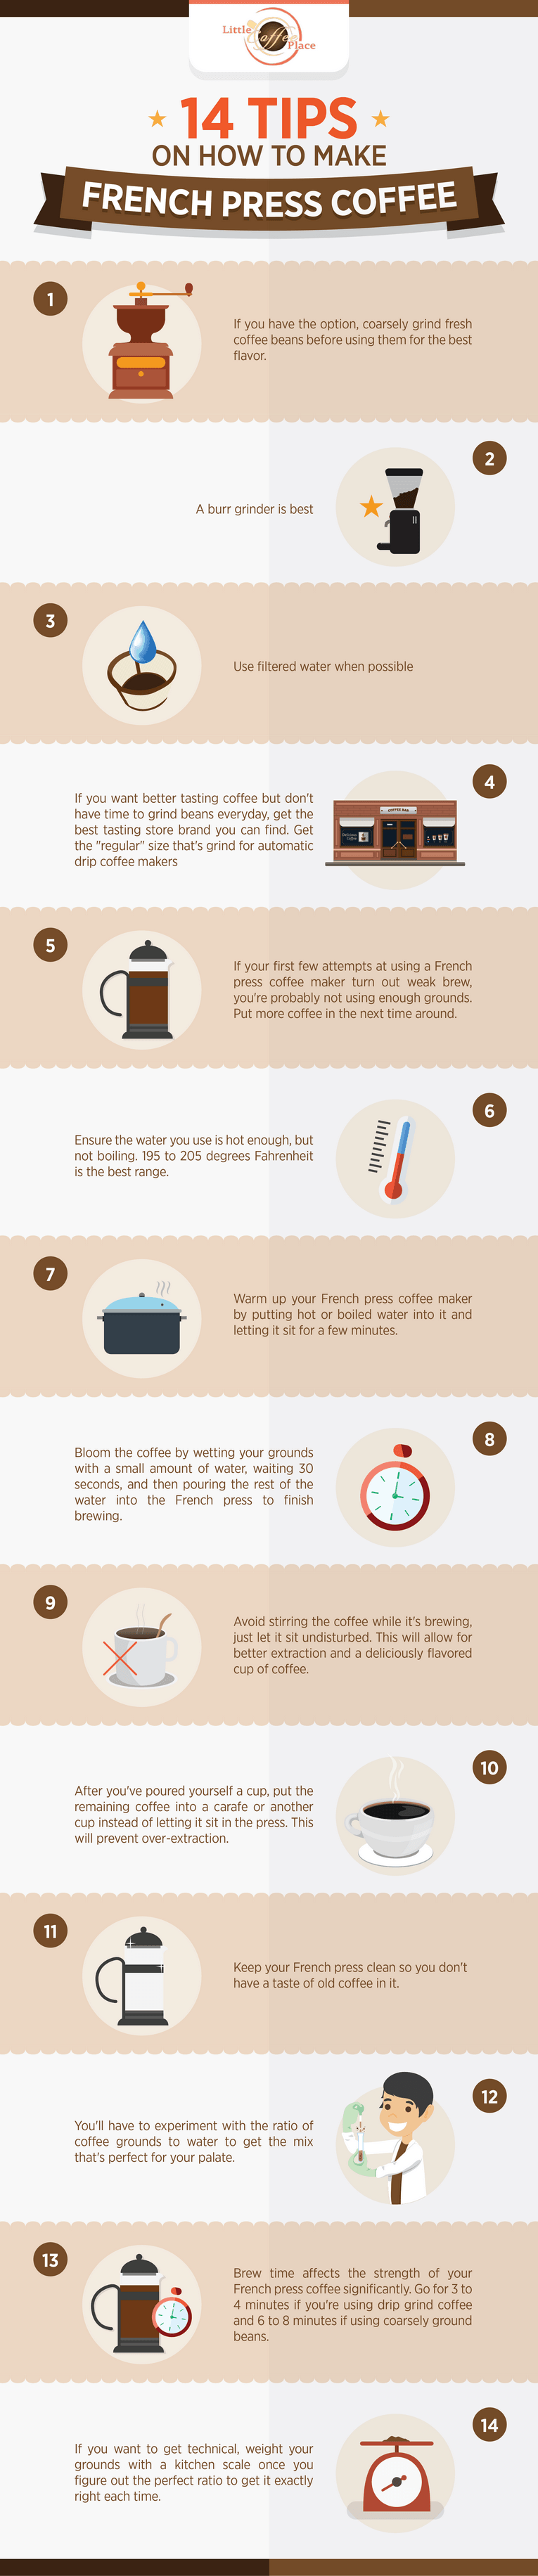 12 Tips on How to Make French Press Coffee